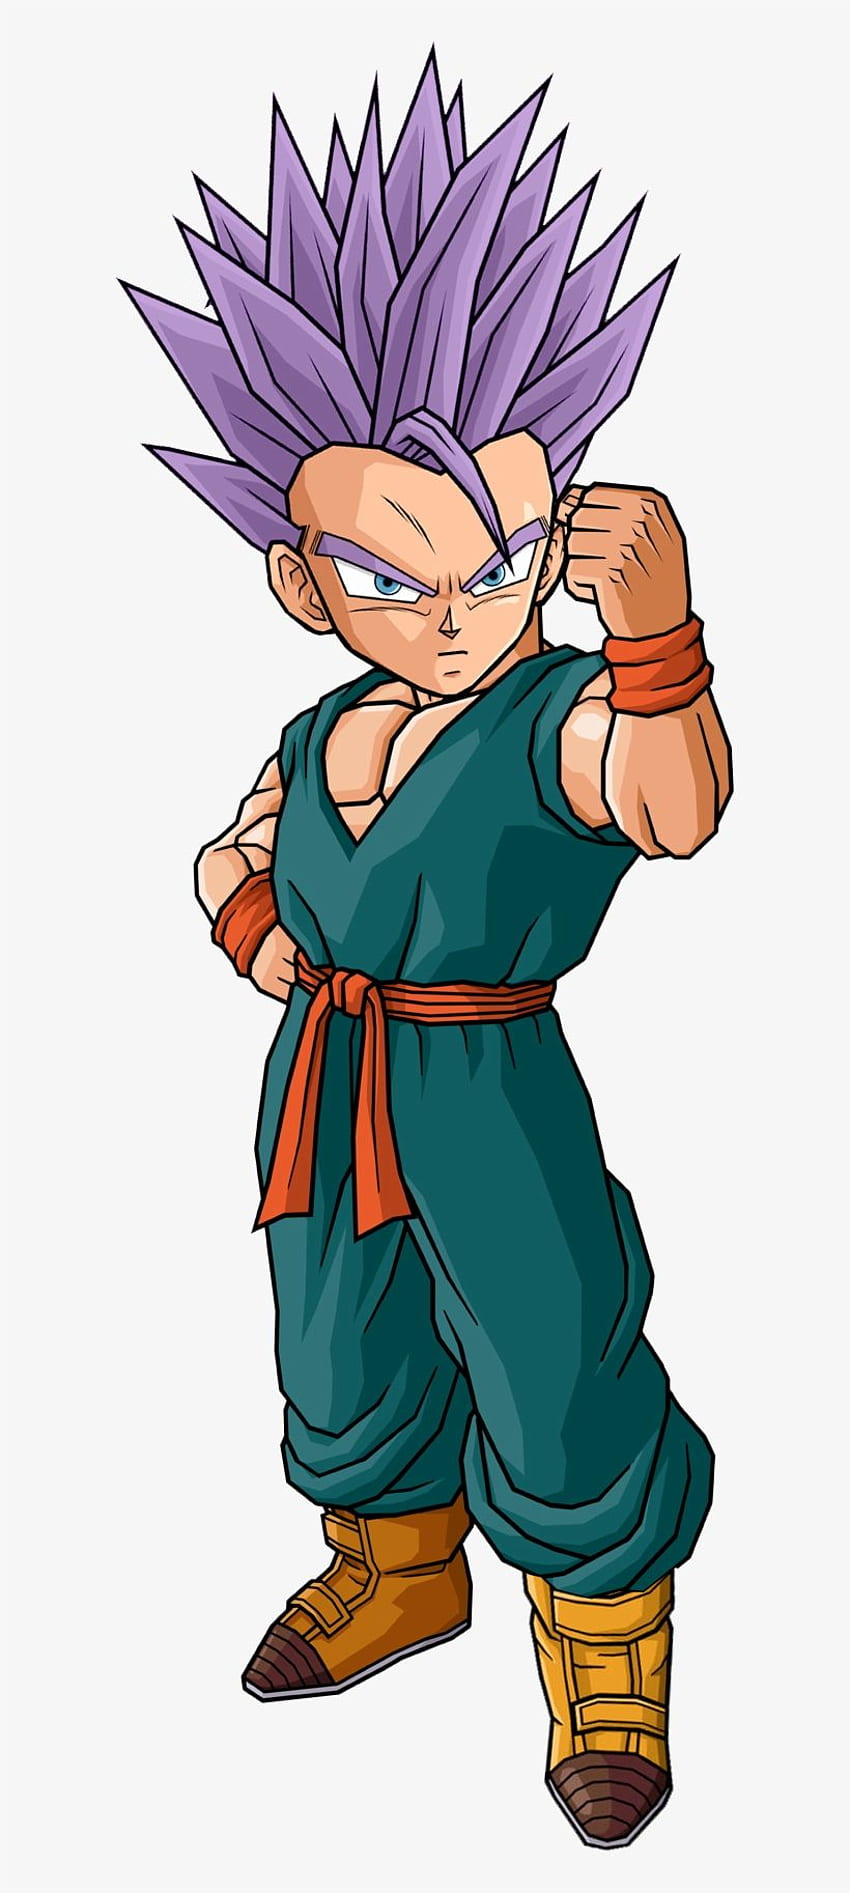 1920x1080px, 1080P Free download | Mystic Kid Trunks By Db Own Universe ...